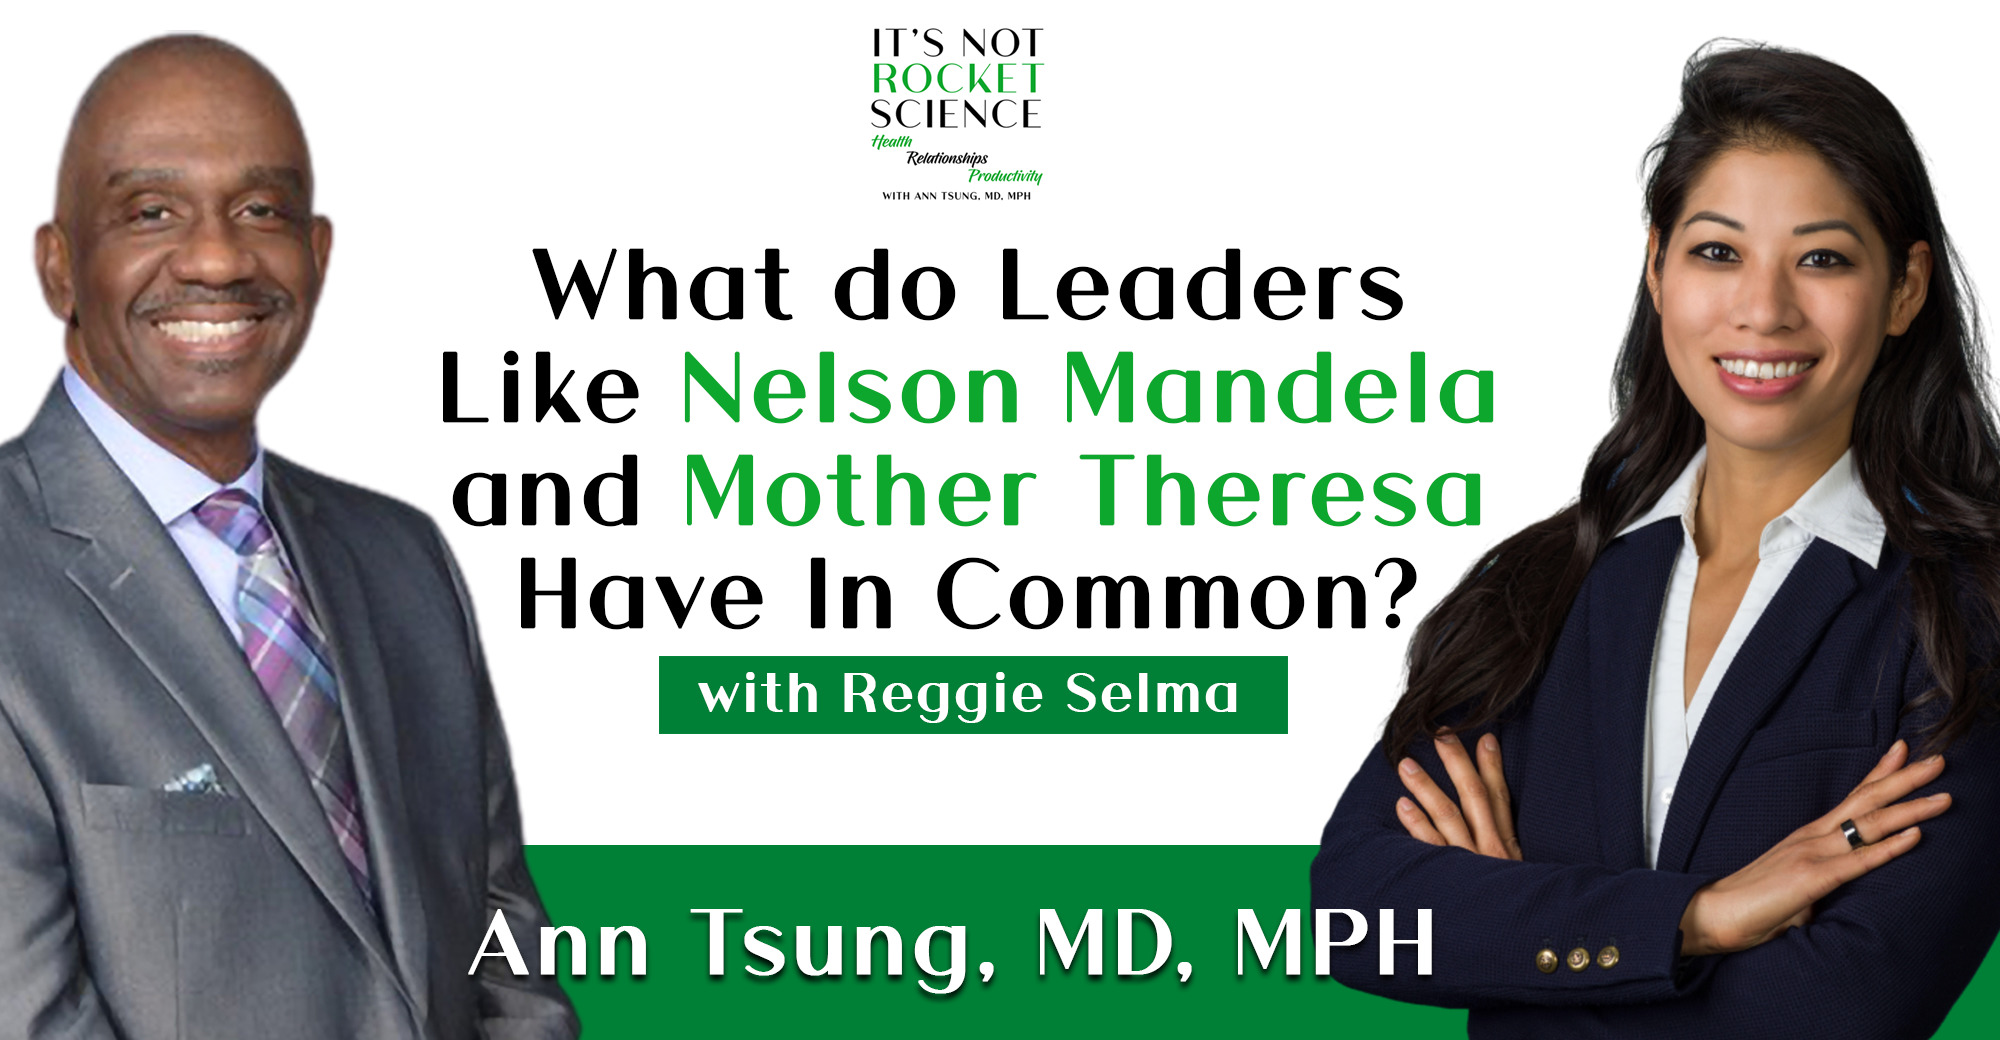 007 – What do Leaders Like Nelson Mandela and Mother Theresa Have in Common? With Reggie Selma: Award-Winning CNN Photojournalist for 32 Years